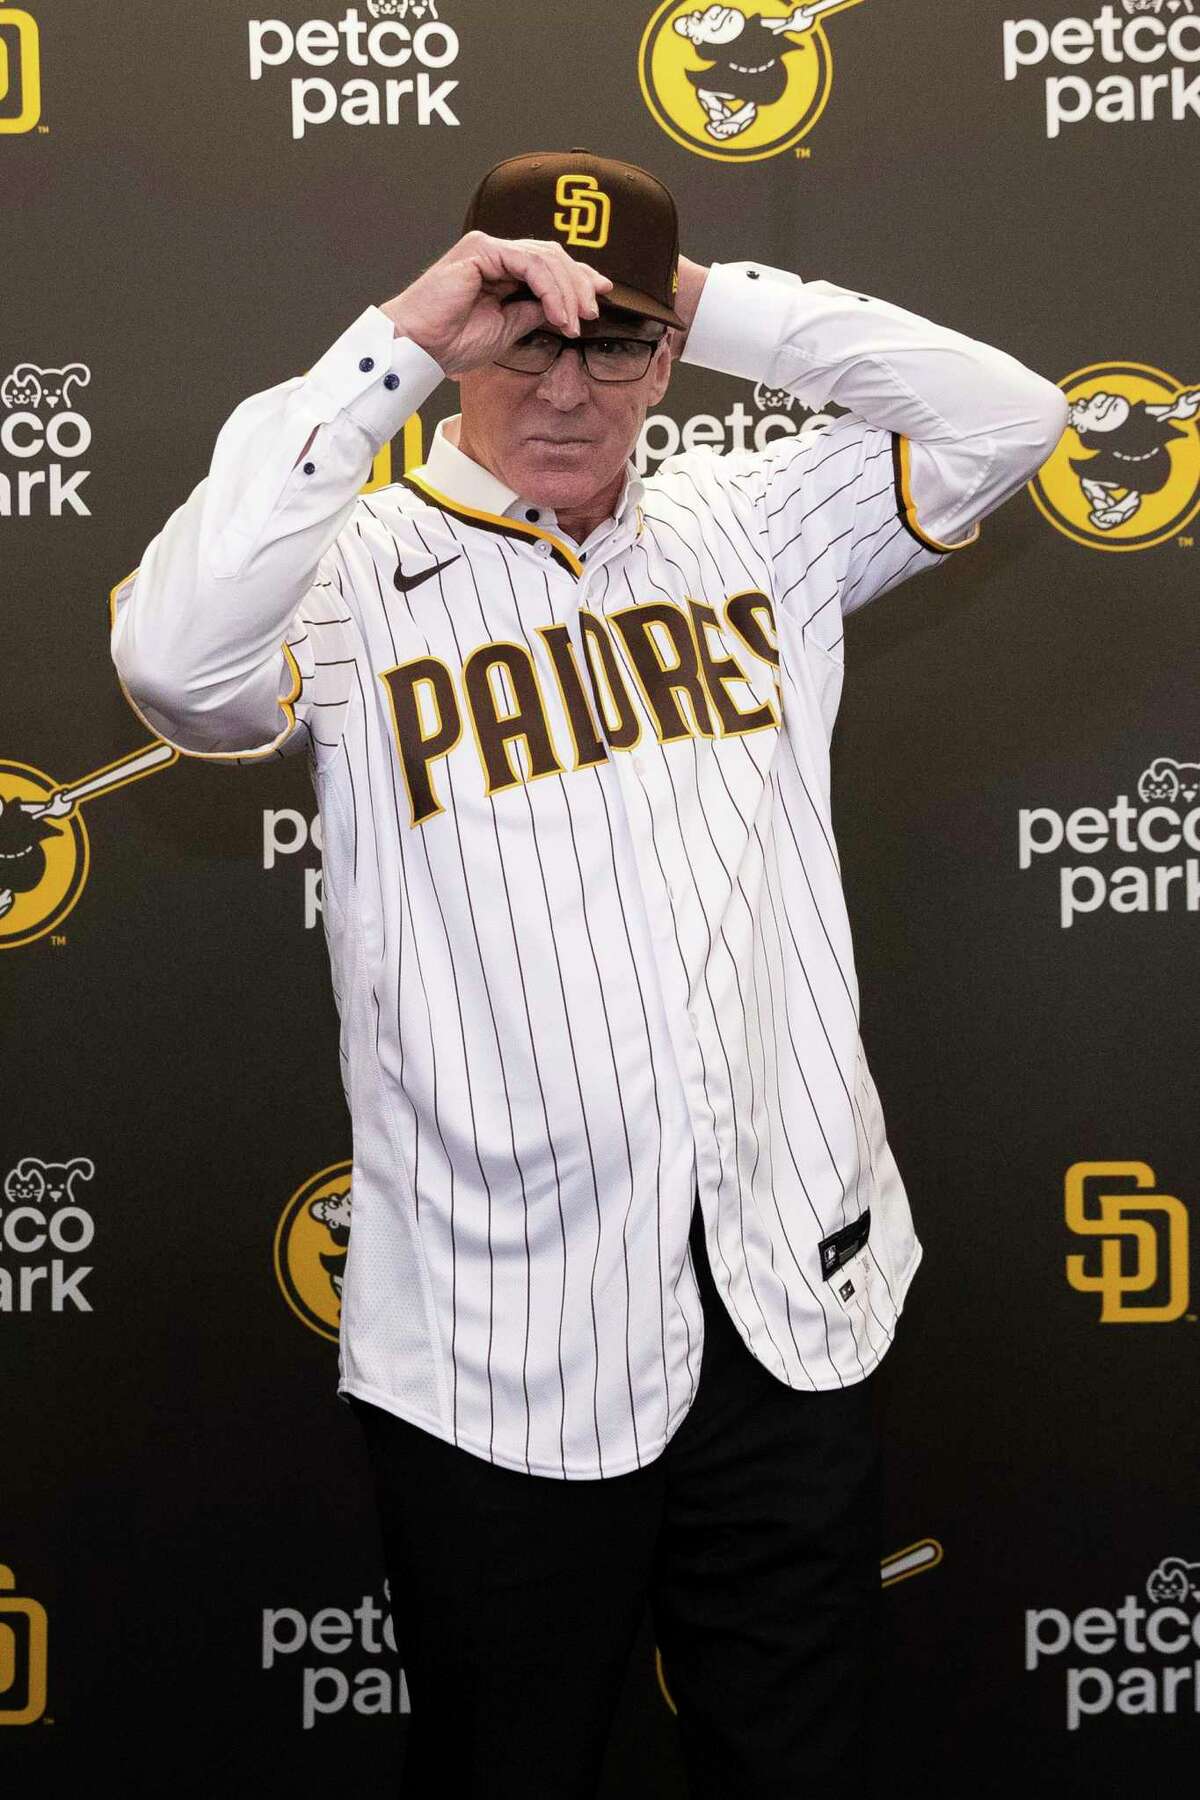 New San Diego Padres baseball team manager Bob Melvin puts on a hat after an introductory press conference in San Diego, Monday, Nov. 1, 2021. a(AP Photo/Derrick Tuskan)